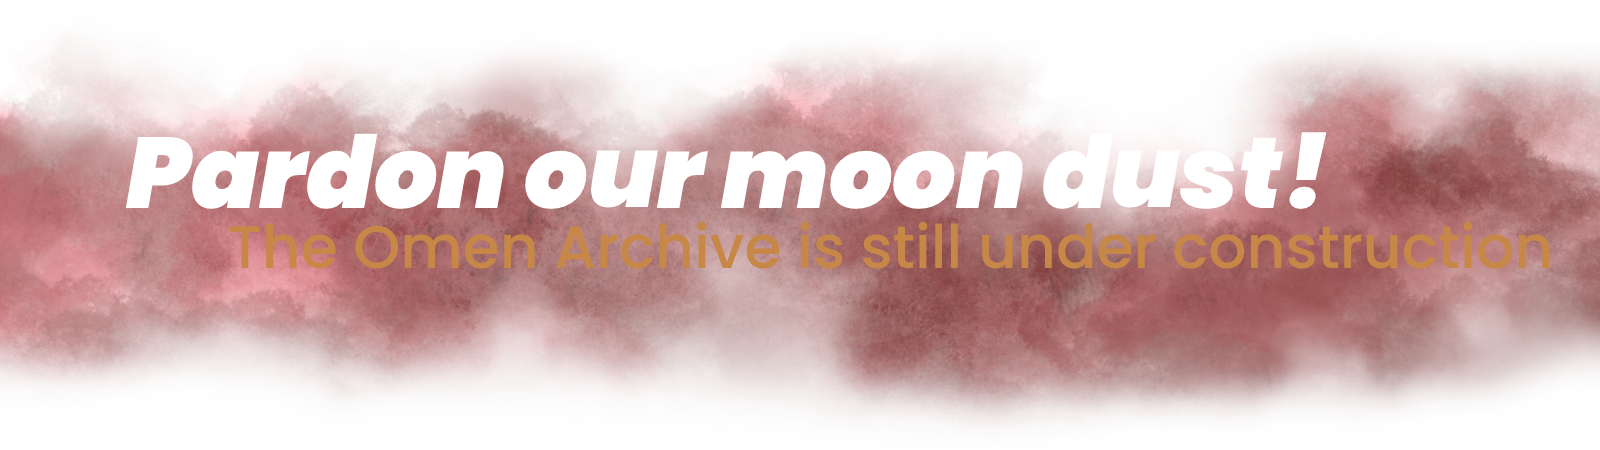 The text “Pardon our moon
        dust!” in white over the text “The Omen Archive is still under
        construction” in yellow. Red smoke fills the background.